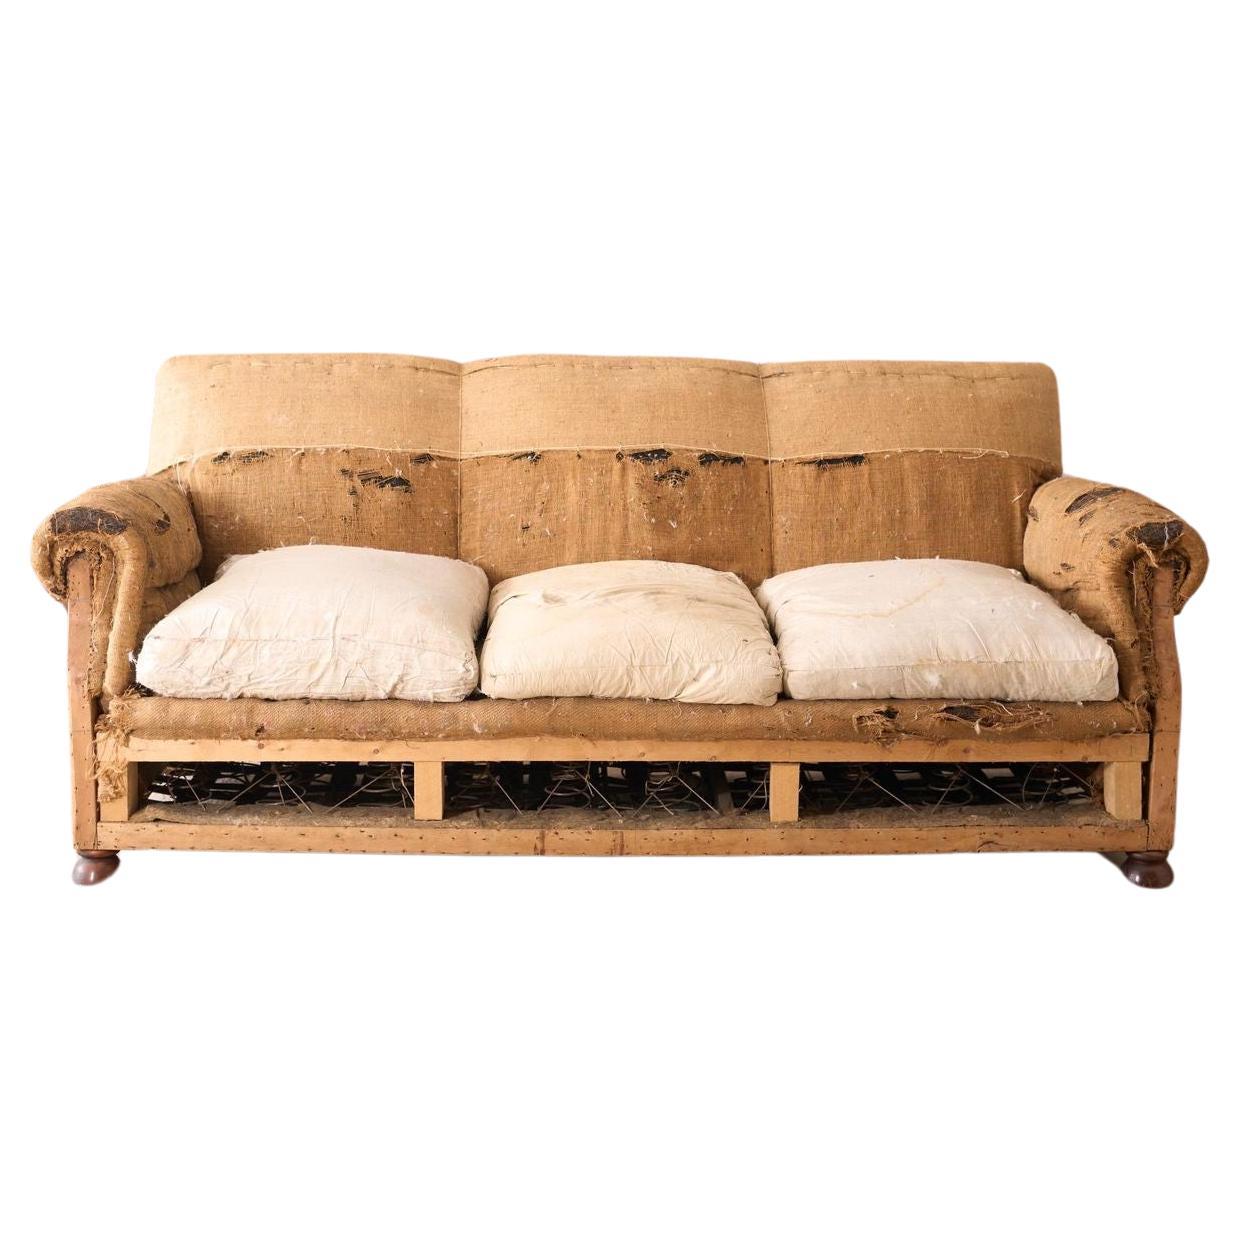 Early 20th century square back country house sofa